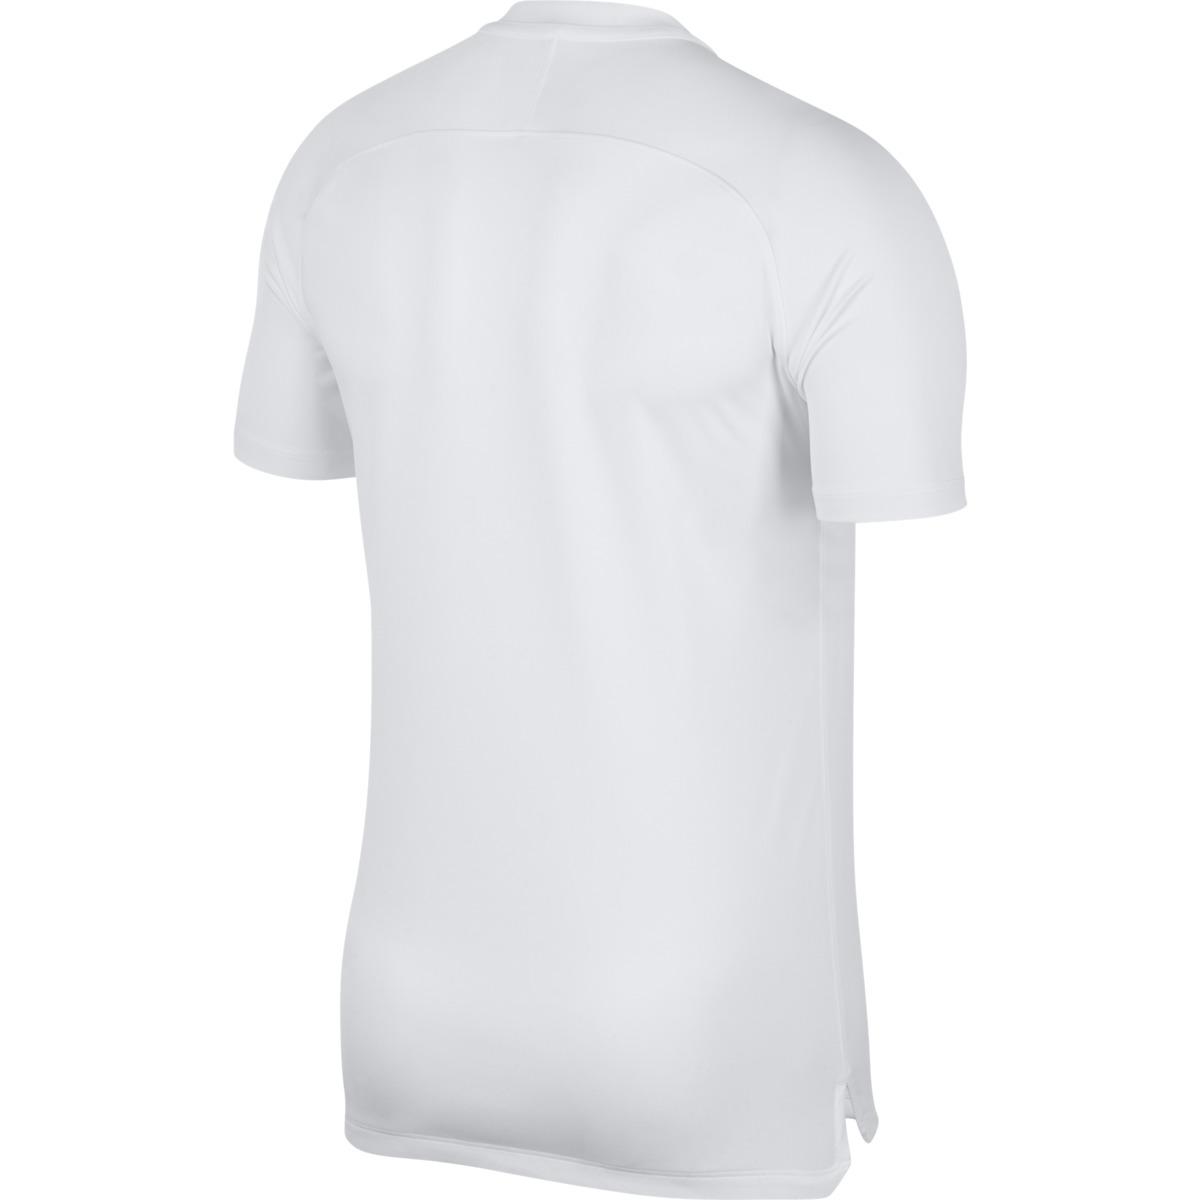 Nike Synthetic England 2018 Dry Squad Training Shirt in White for Men - Lyst